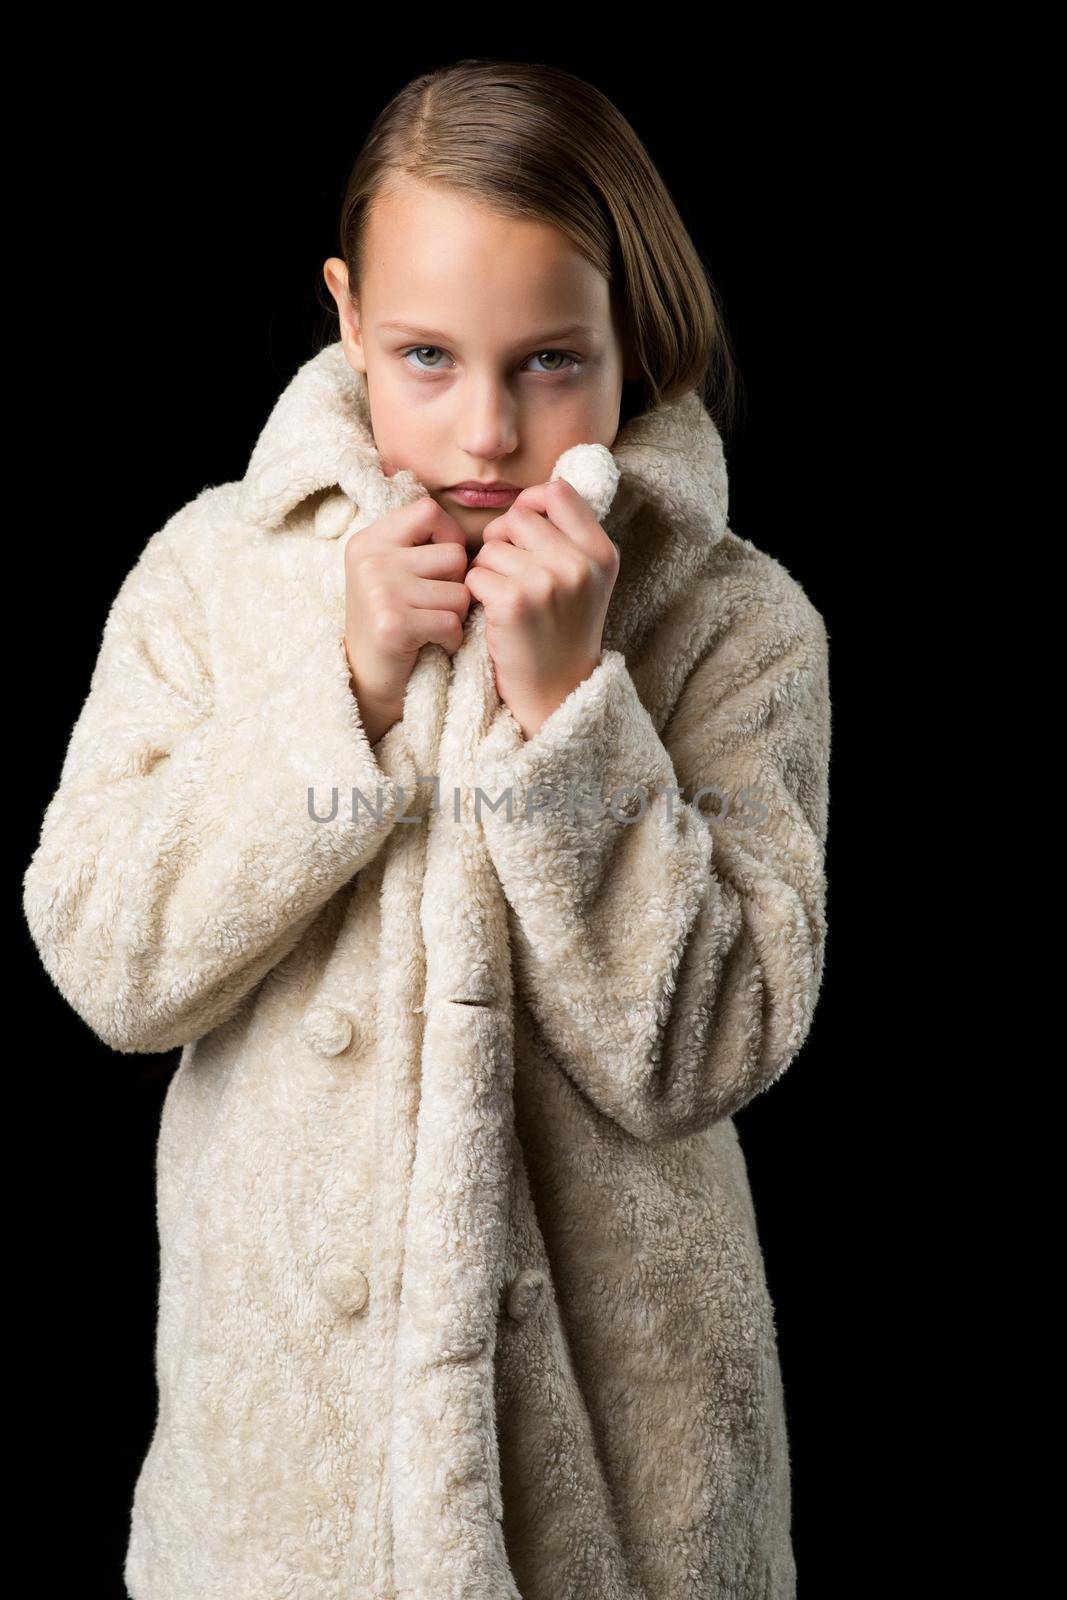 Portrait of girl in beige faux fur coat. Beautiful fashionable blonde girl keeping hands on her collar posing against black background. Trendy child dressed fashion, stylish outerwear